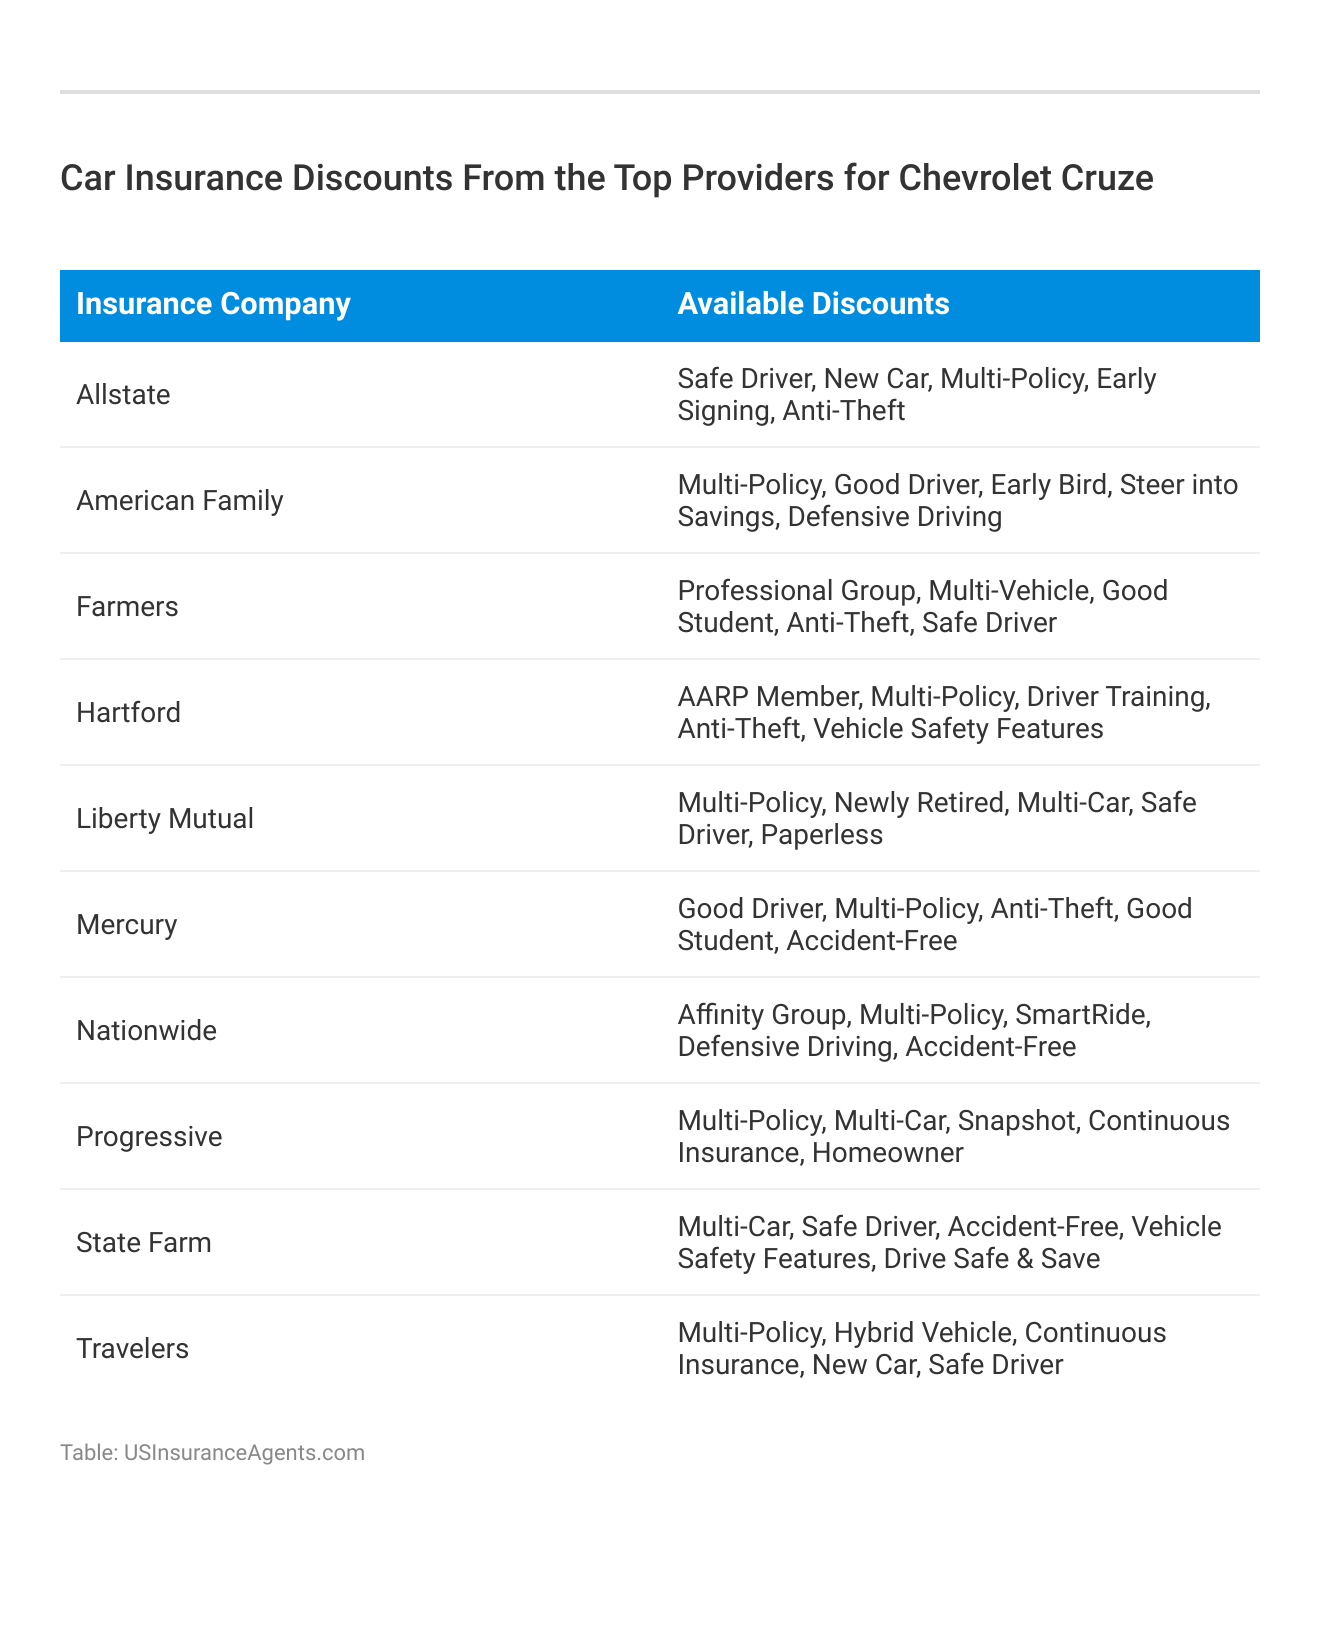 <h3>Car Insurance Discounts From the Top Providers for Chevrolet Cruze</h3>